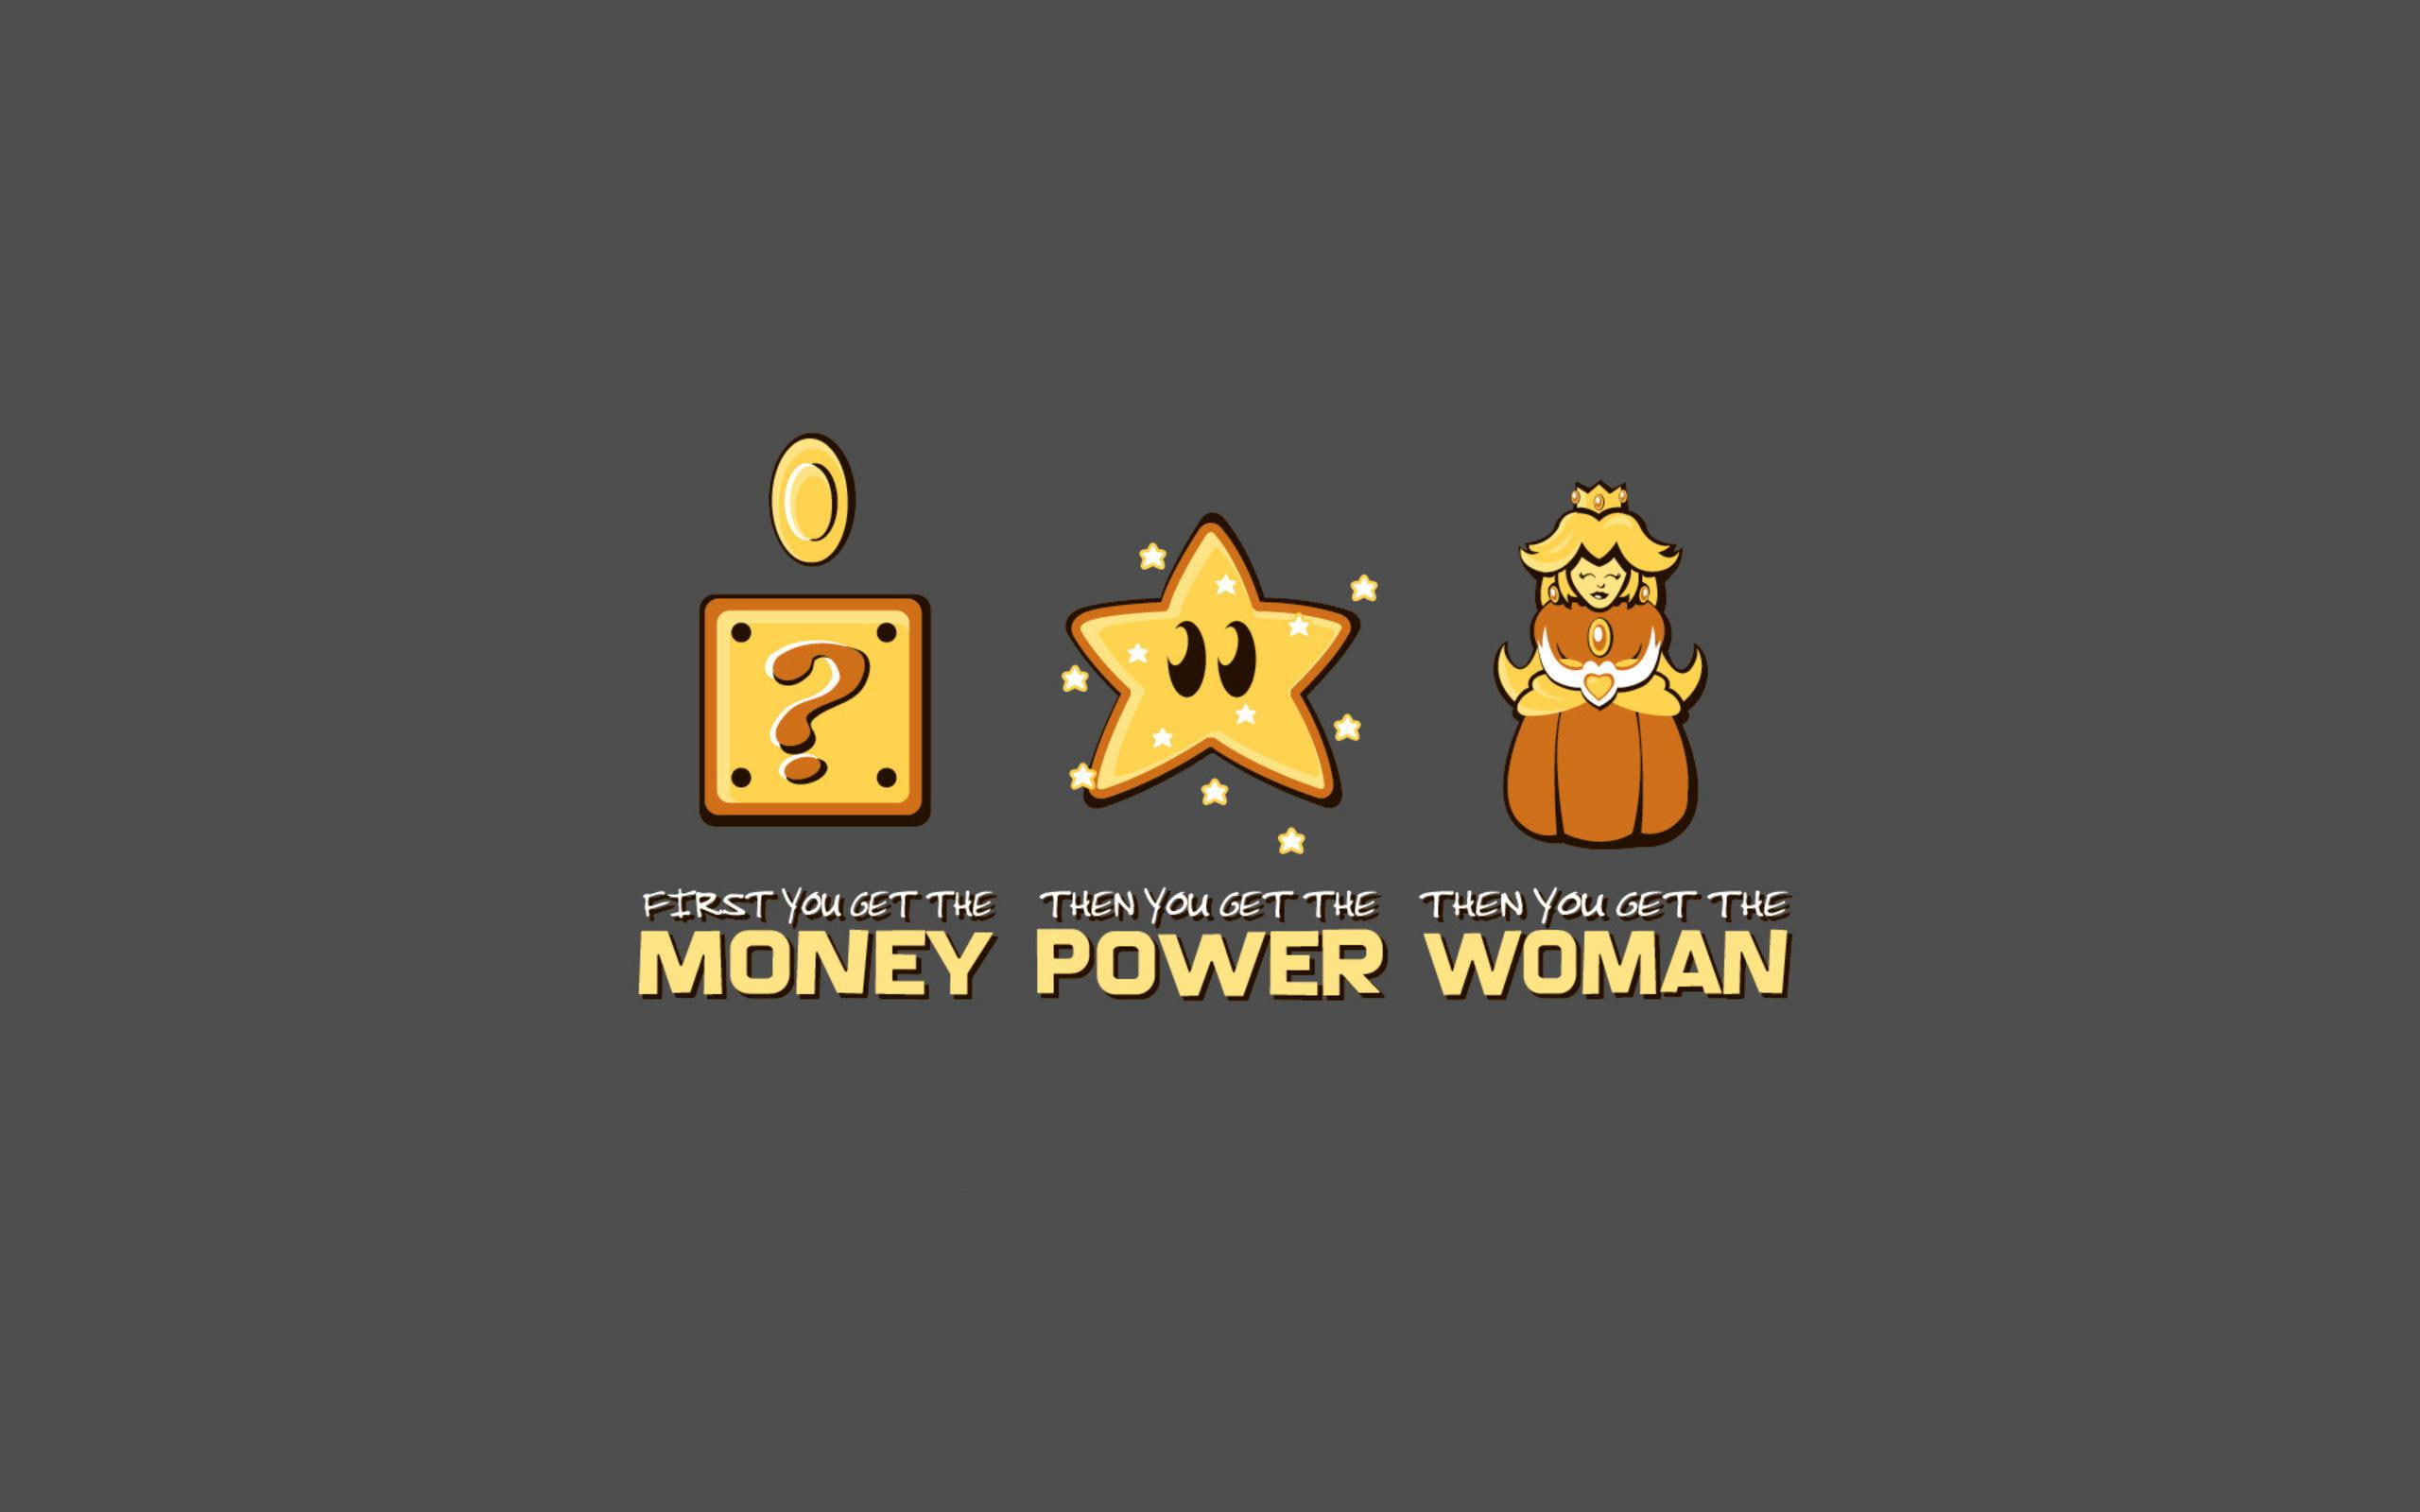 Funny Super Mario Steps, money power woman text